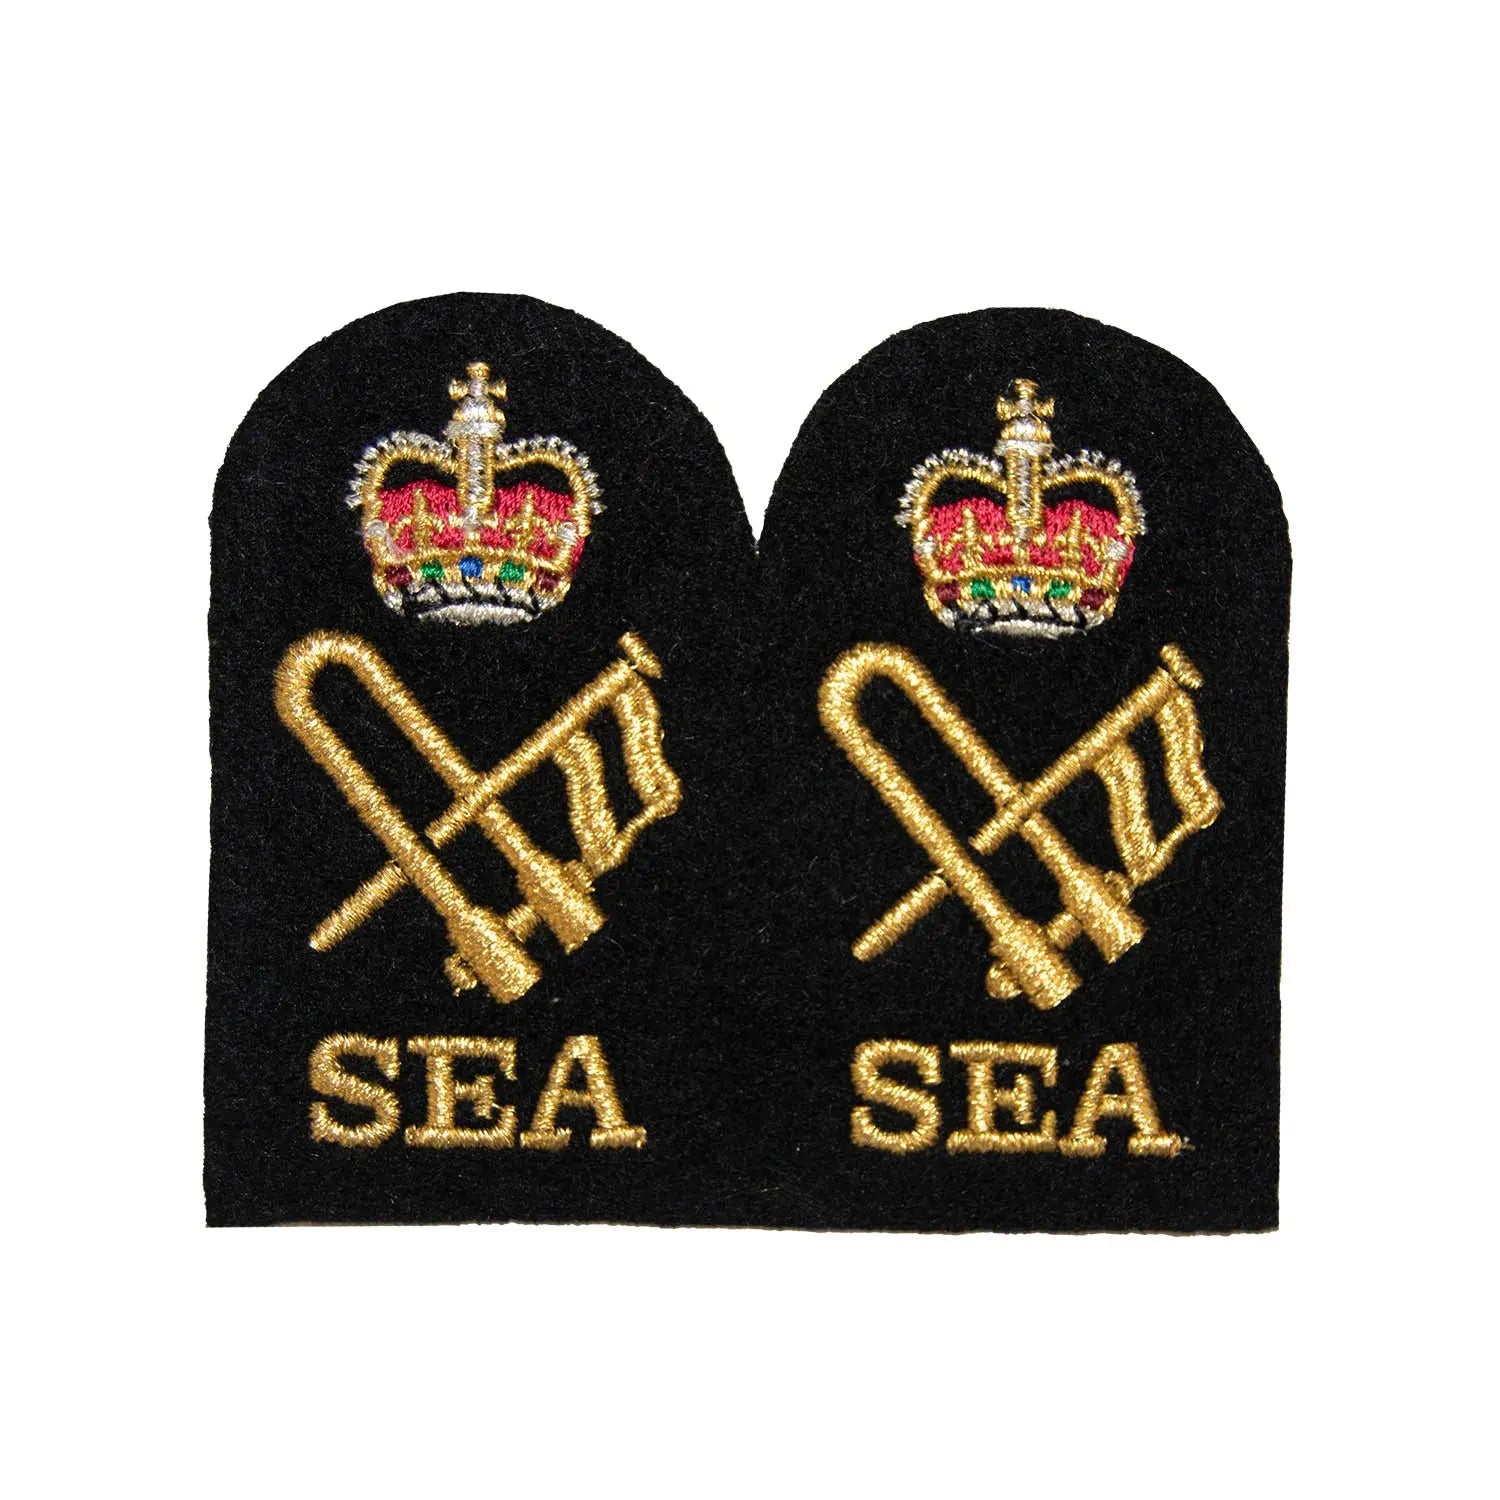 Seaman Specialist Chief Petty Officer Royal Navy Qualification Badges wyedean